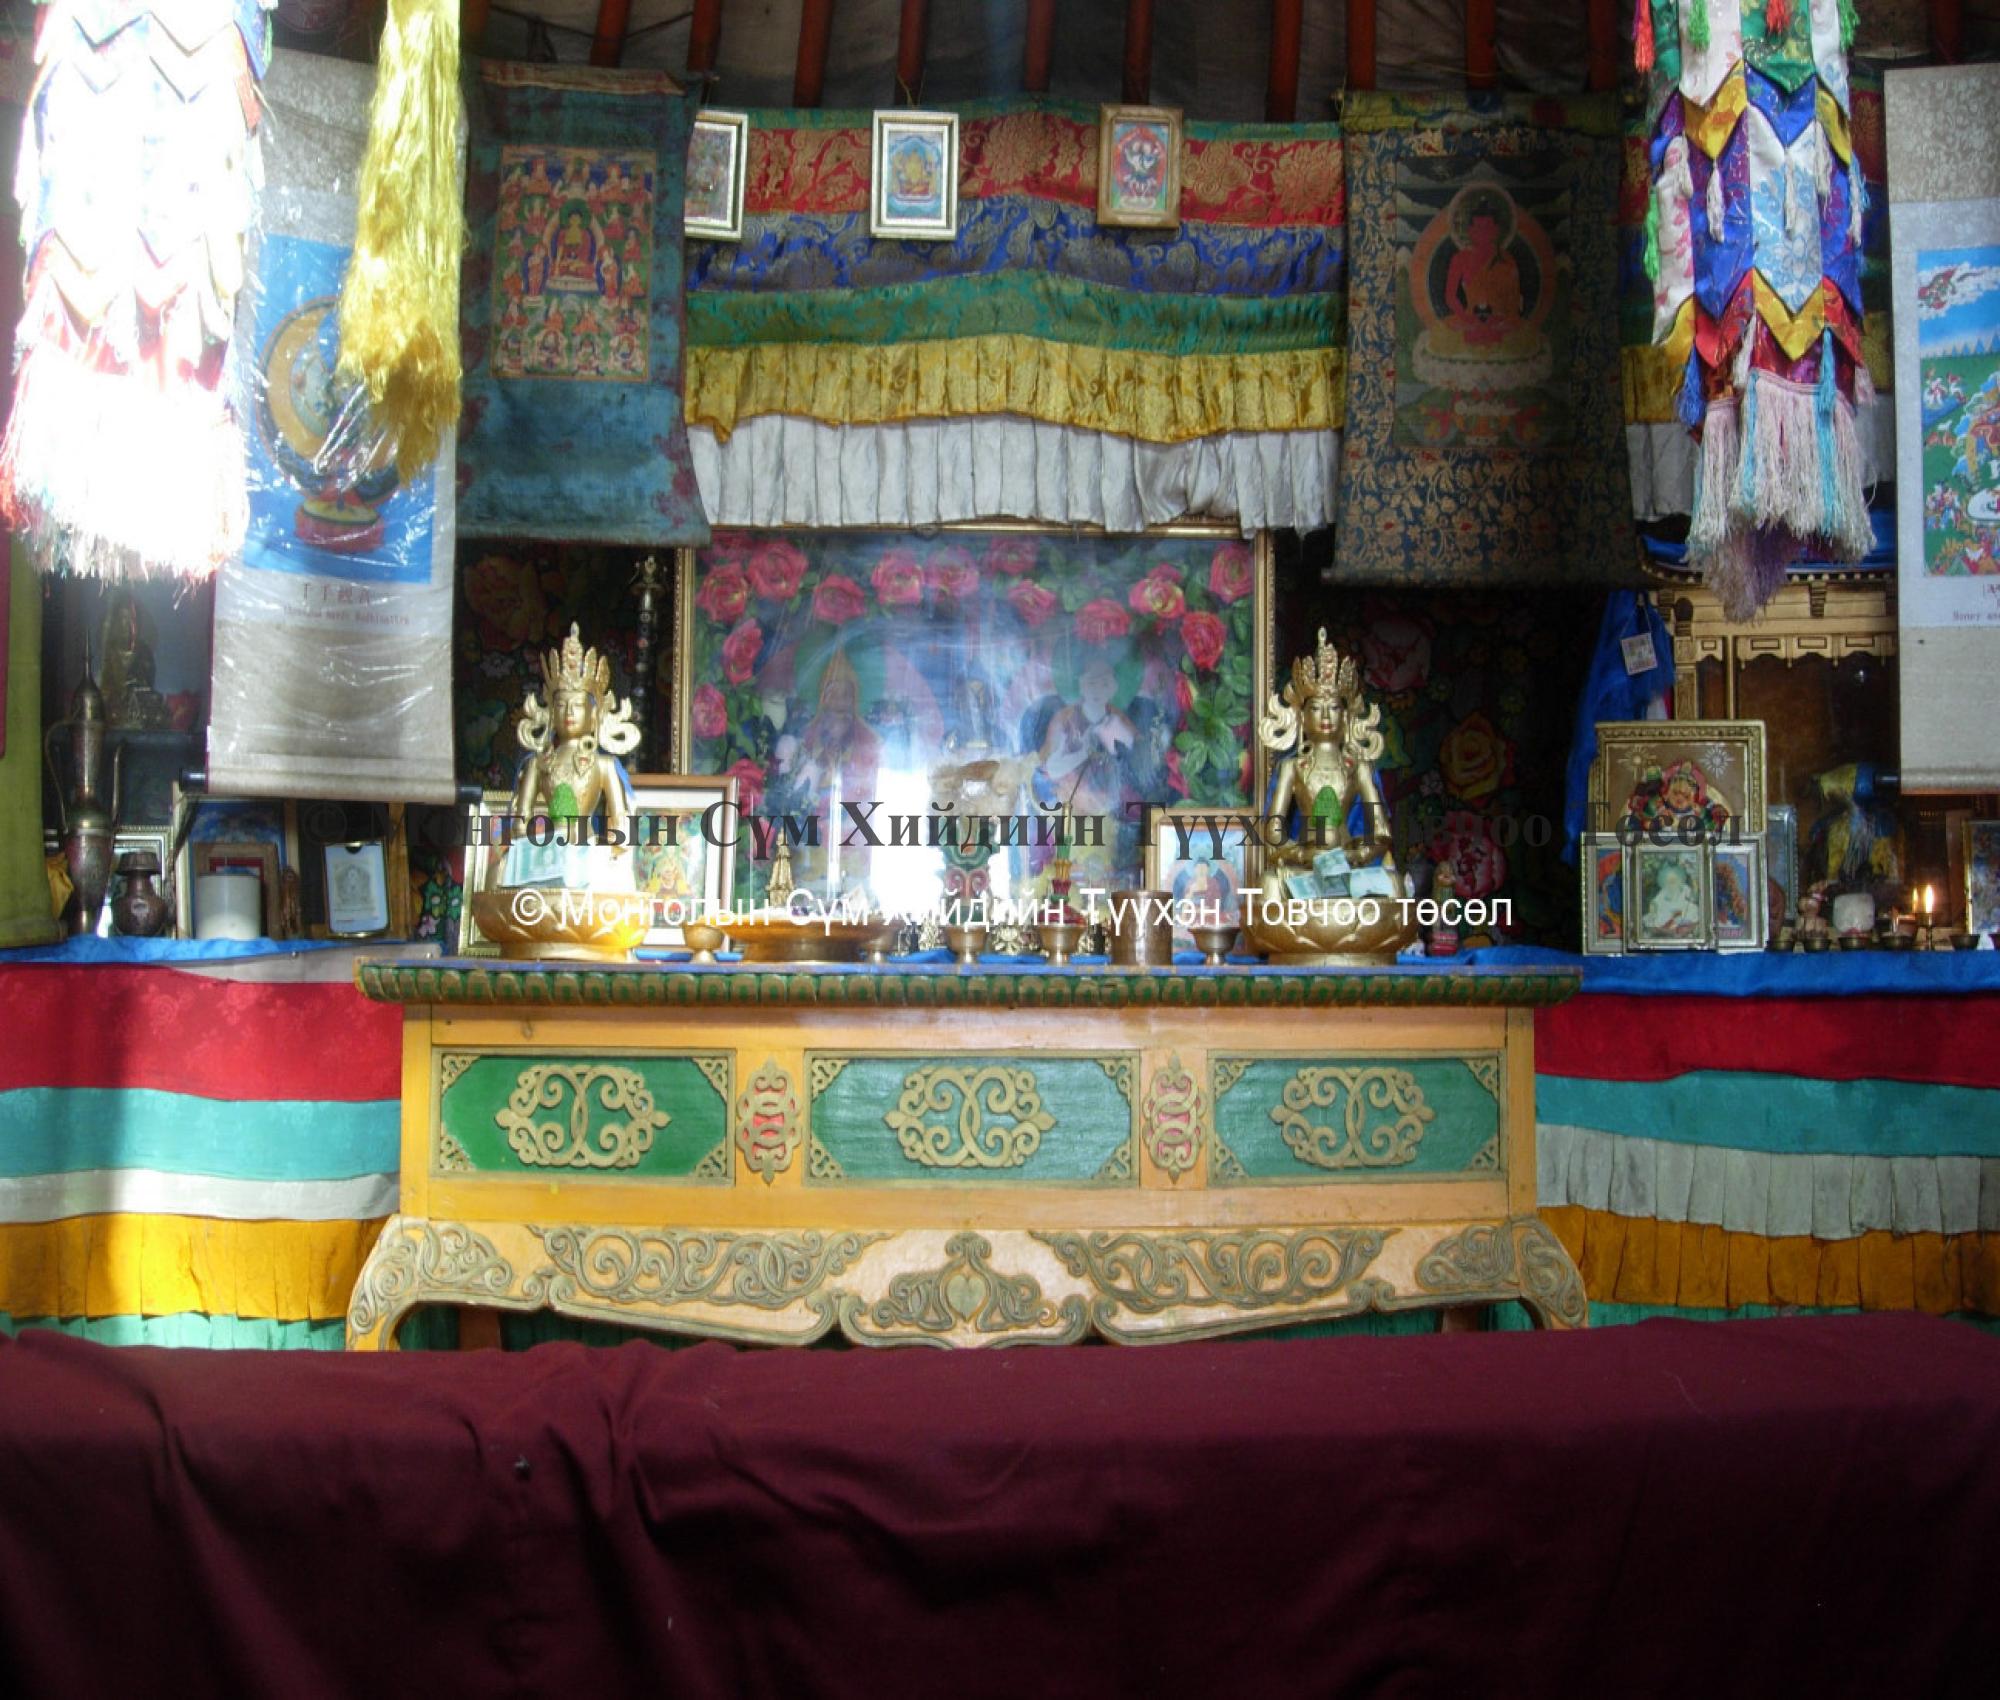 Main 'altar' in the temple